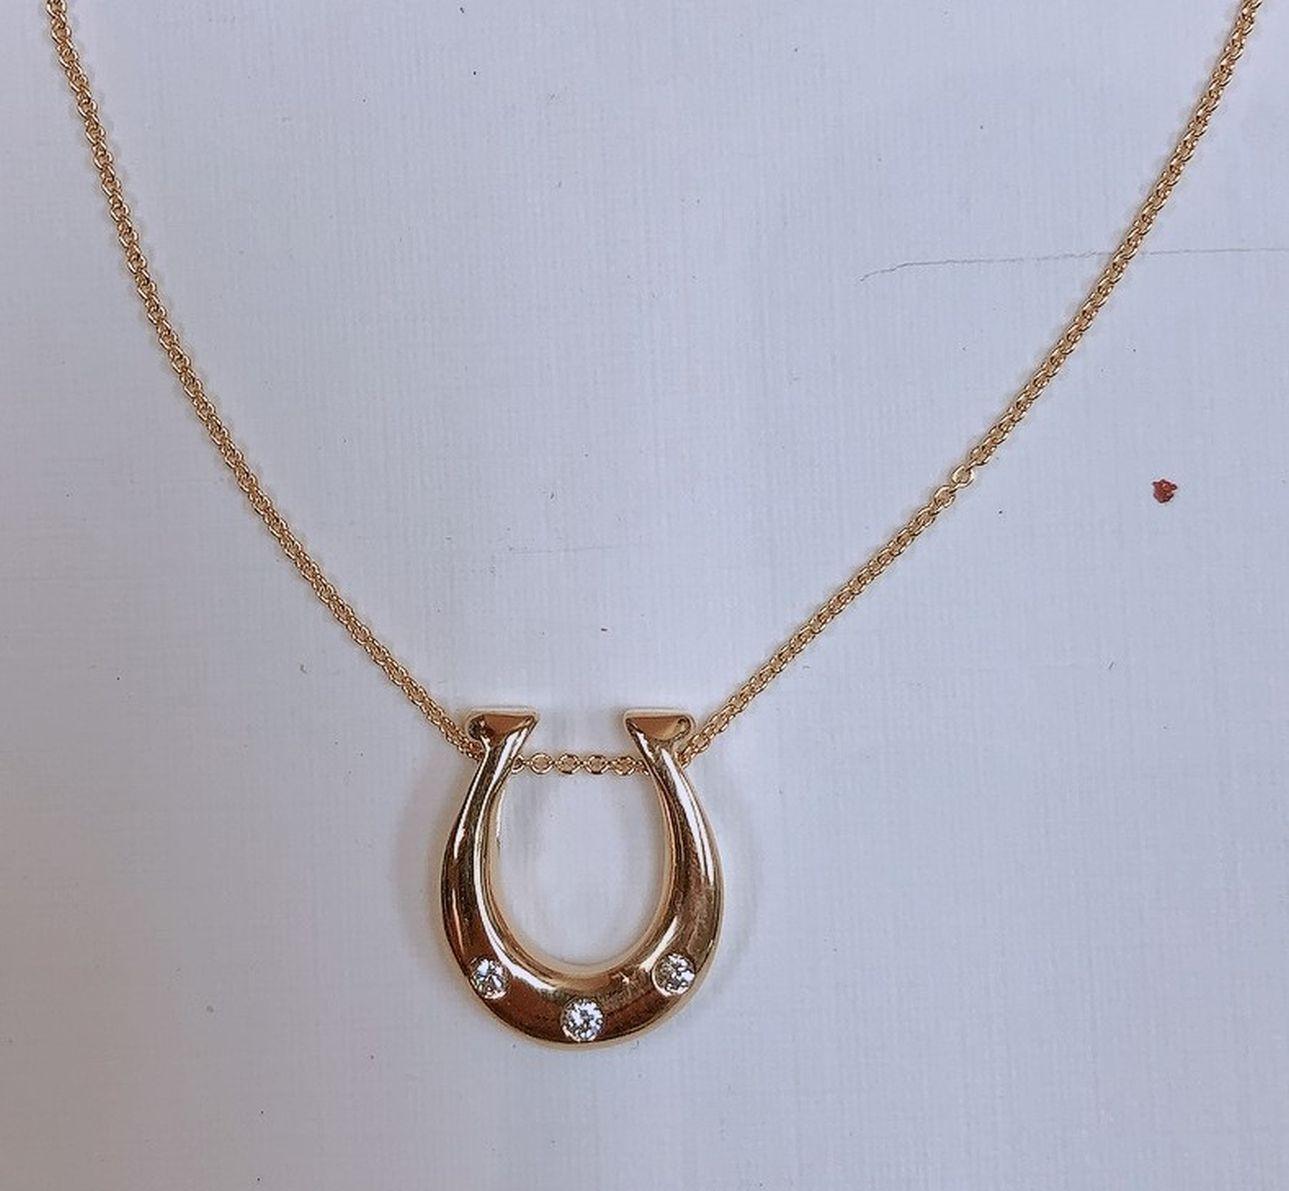 Simply Beautiful! Diamond Horseshoe Gold Drop Pendant Necklace. Hand set with 3 Round Brilliant-Cut Diamonds weighing approx. 0.17tcw. Hand crafted 14 Karat Yellow Gold mounting. Suspended from a 16” Yellow Gold chain. Pendant measures approx.